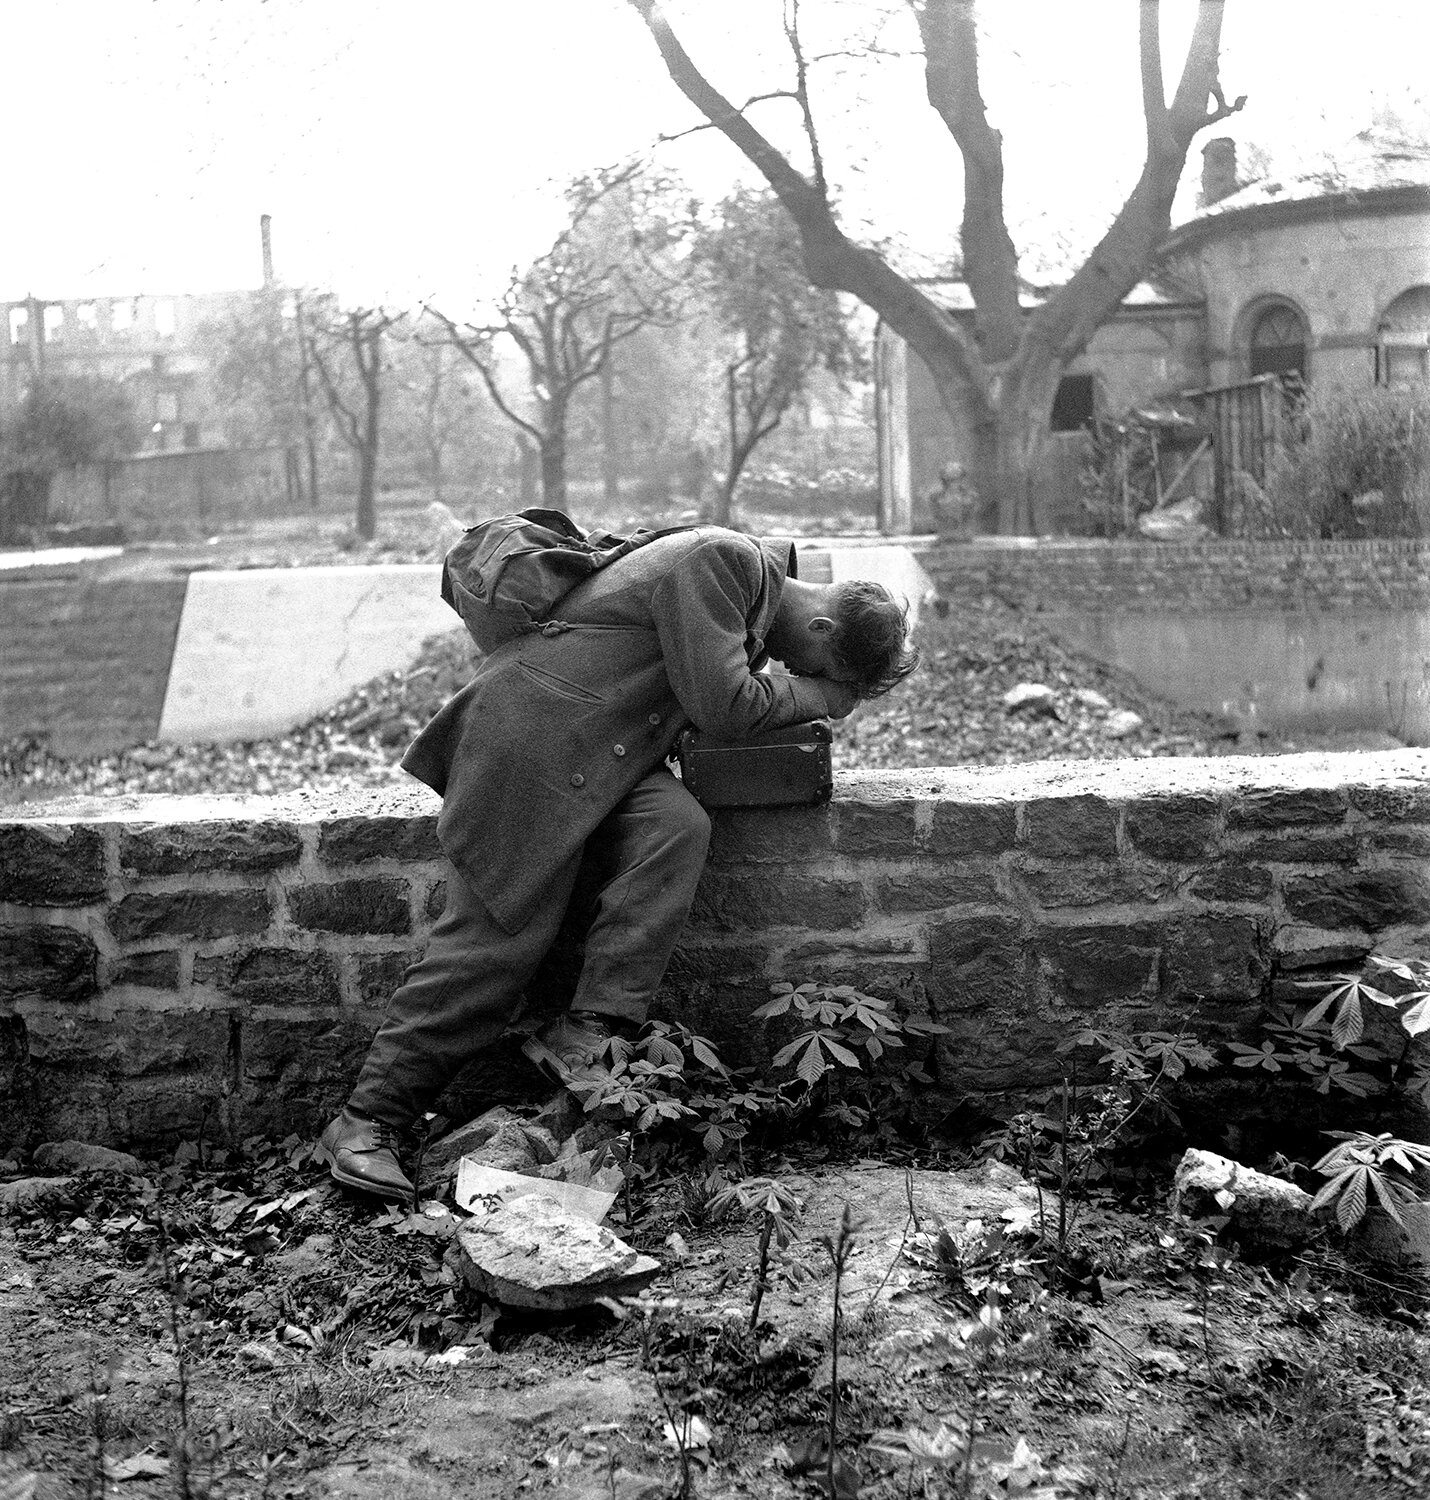 vaccaro_defeated soldier_A German soldier, held prisoner in the United States of America, returns to his Frankfurt home only to find rubble. March 4, 1947.jpg